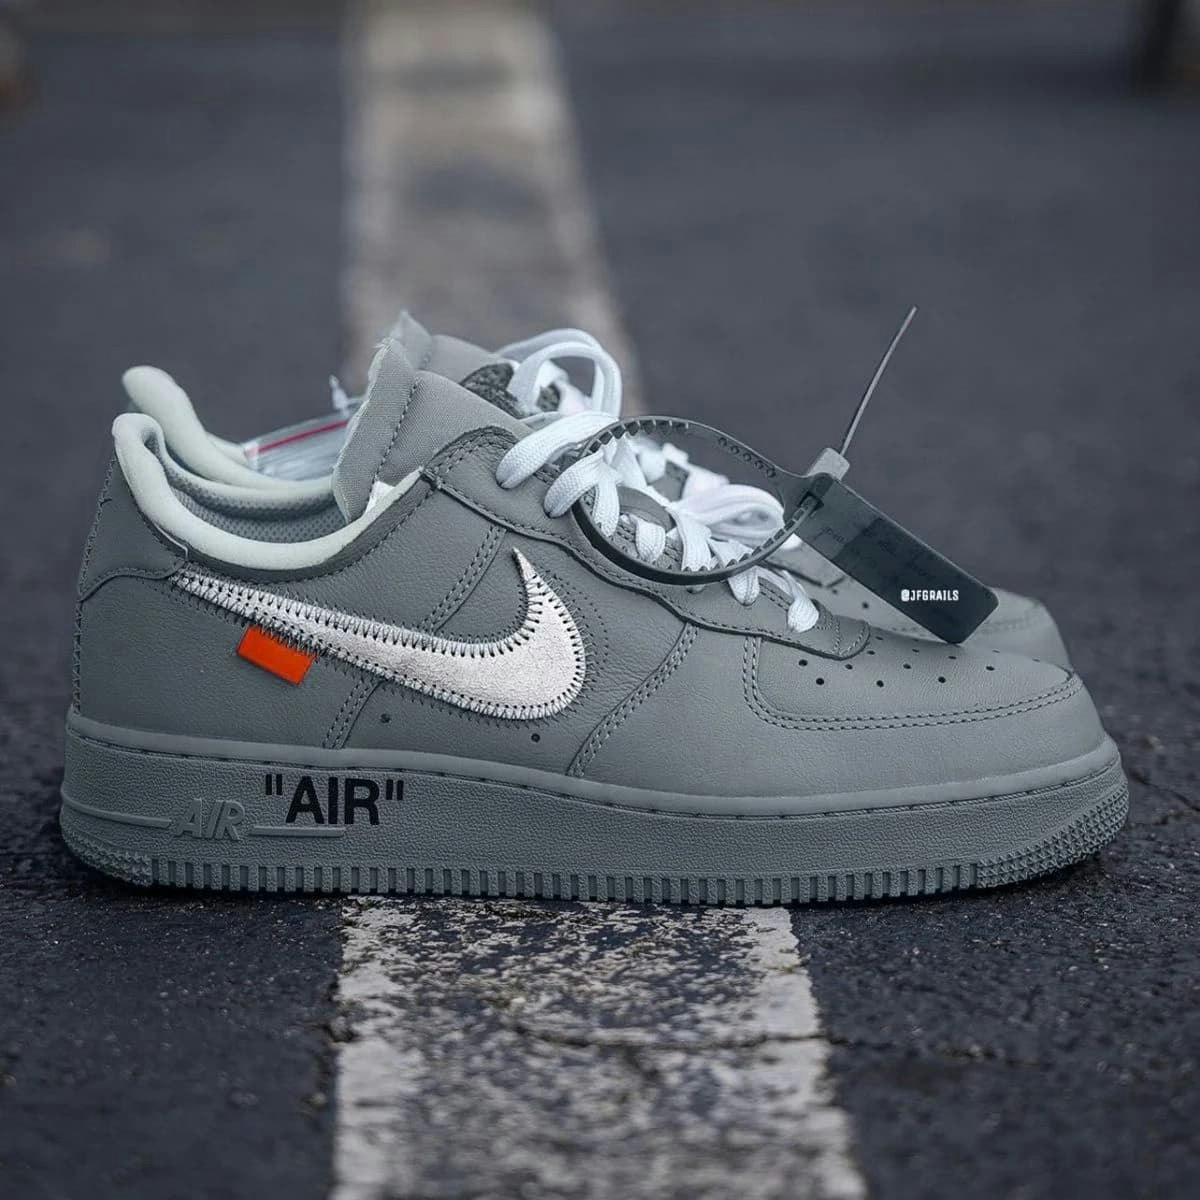 Off White x Nike Air Force 1 Low "Grey" 